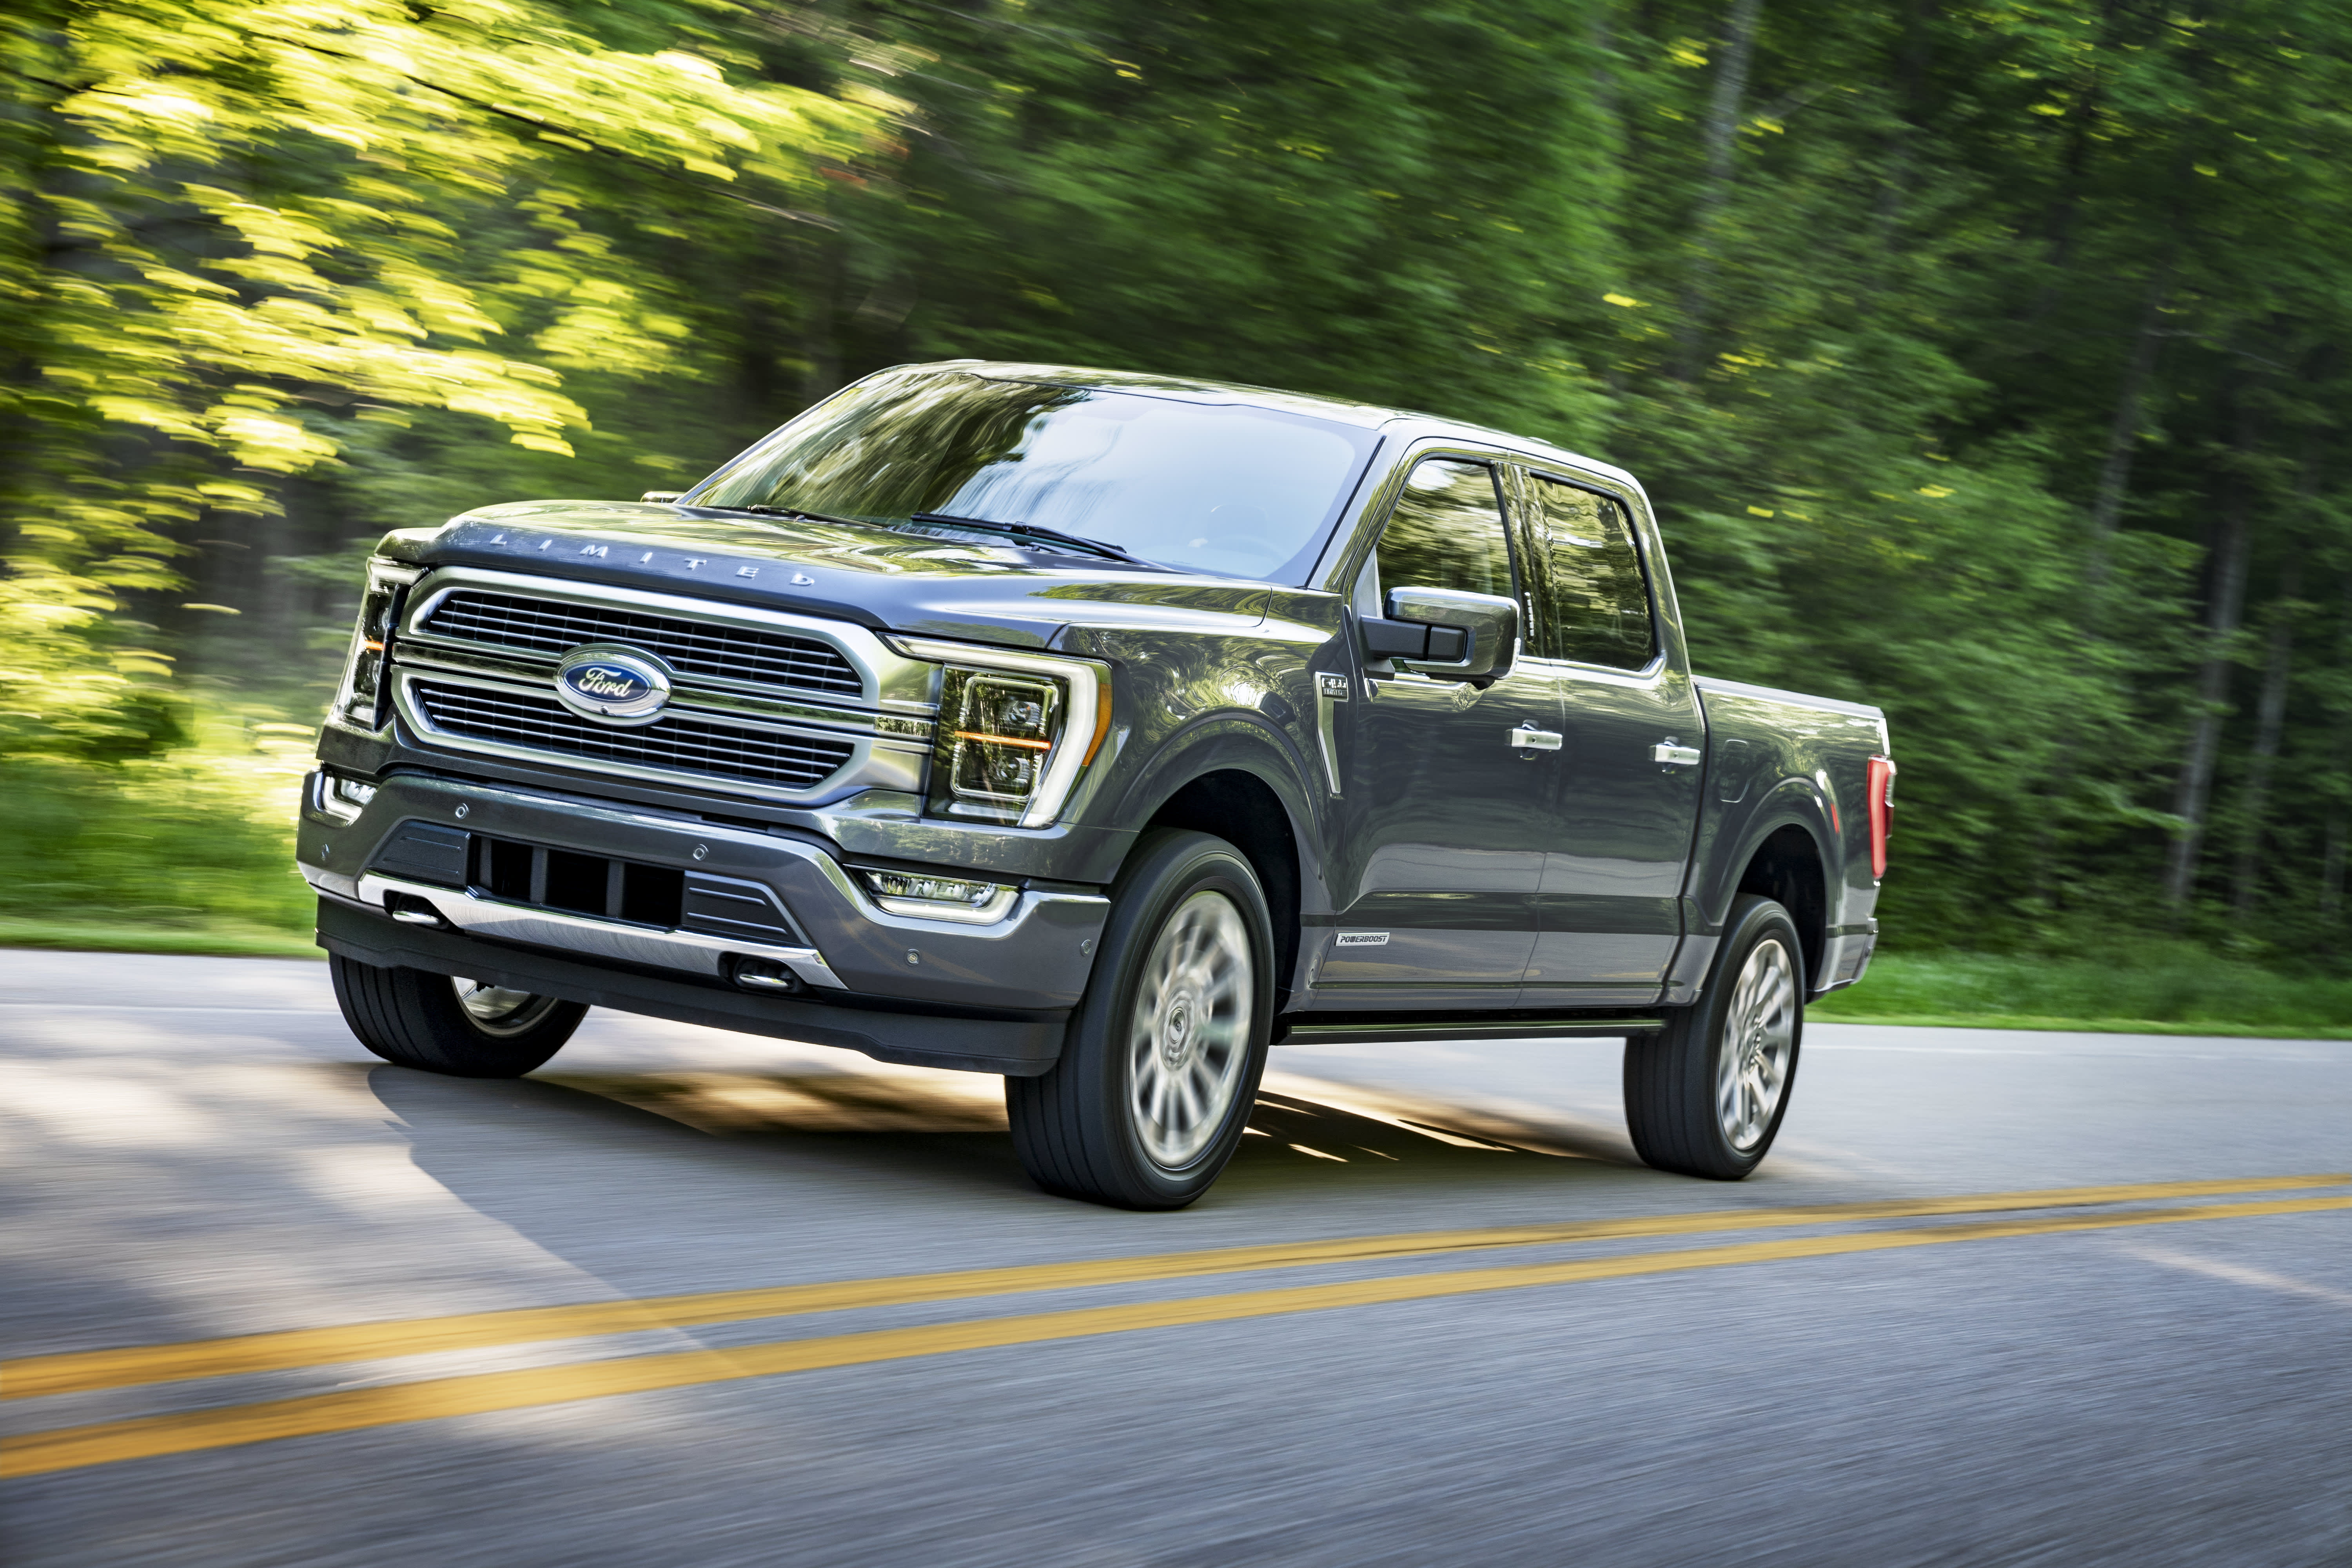 New Ford F 150 Adding Tech People Are Willing To Pay For Exec Says